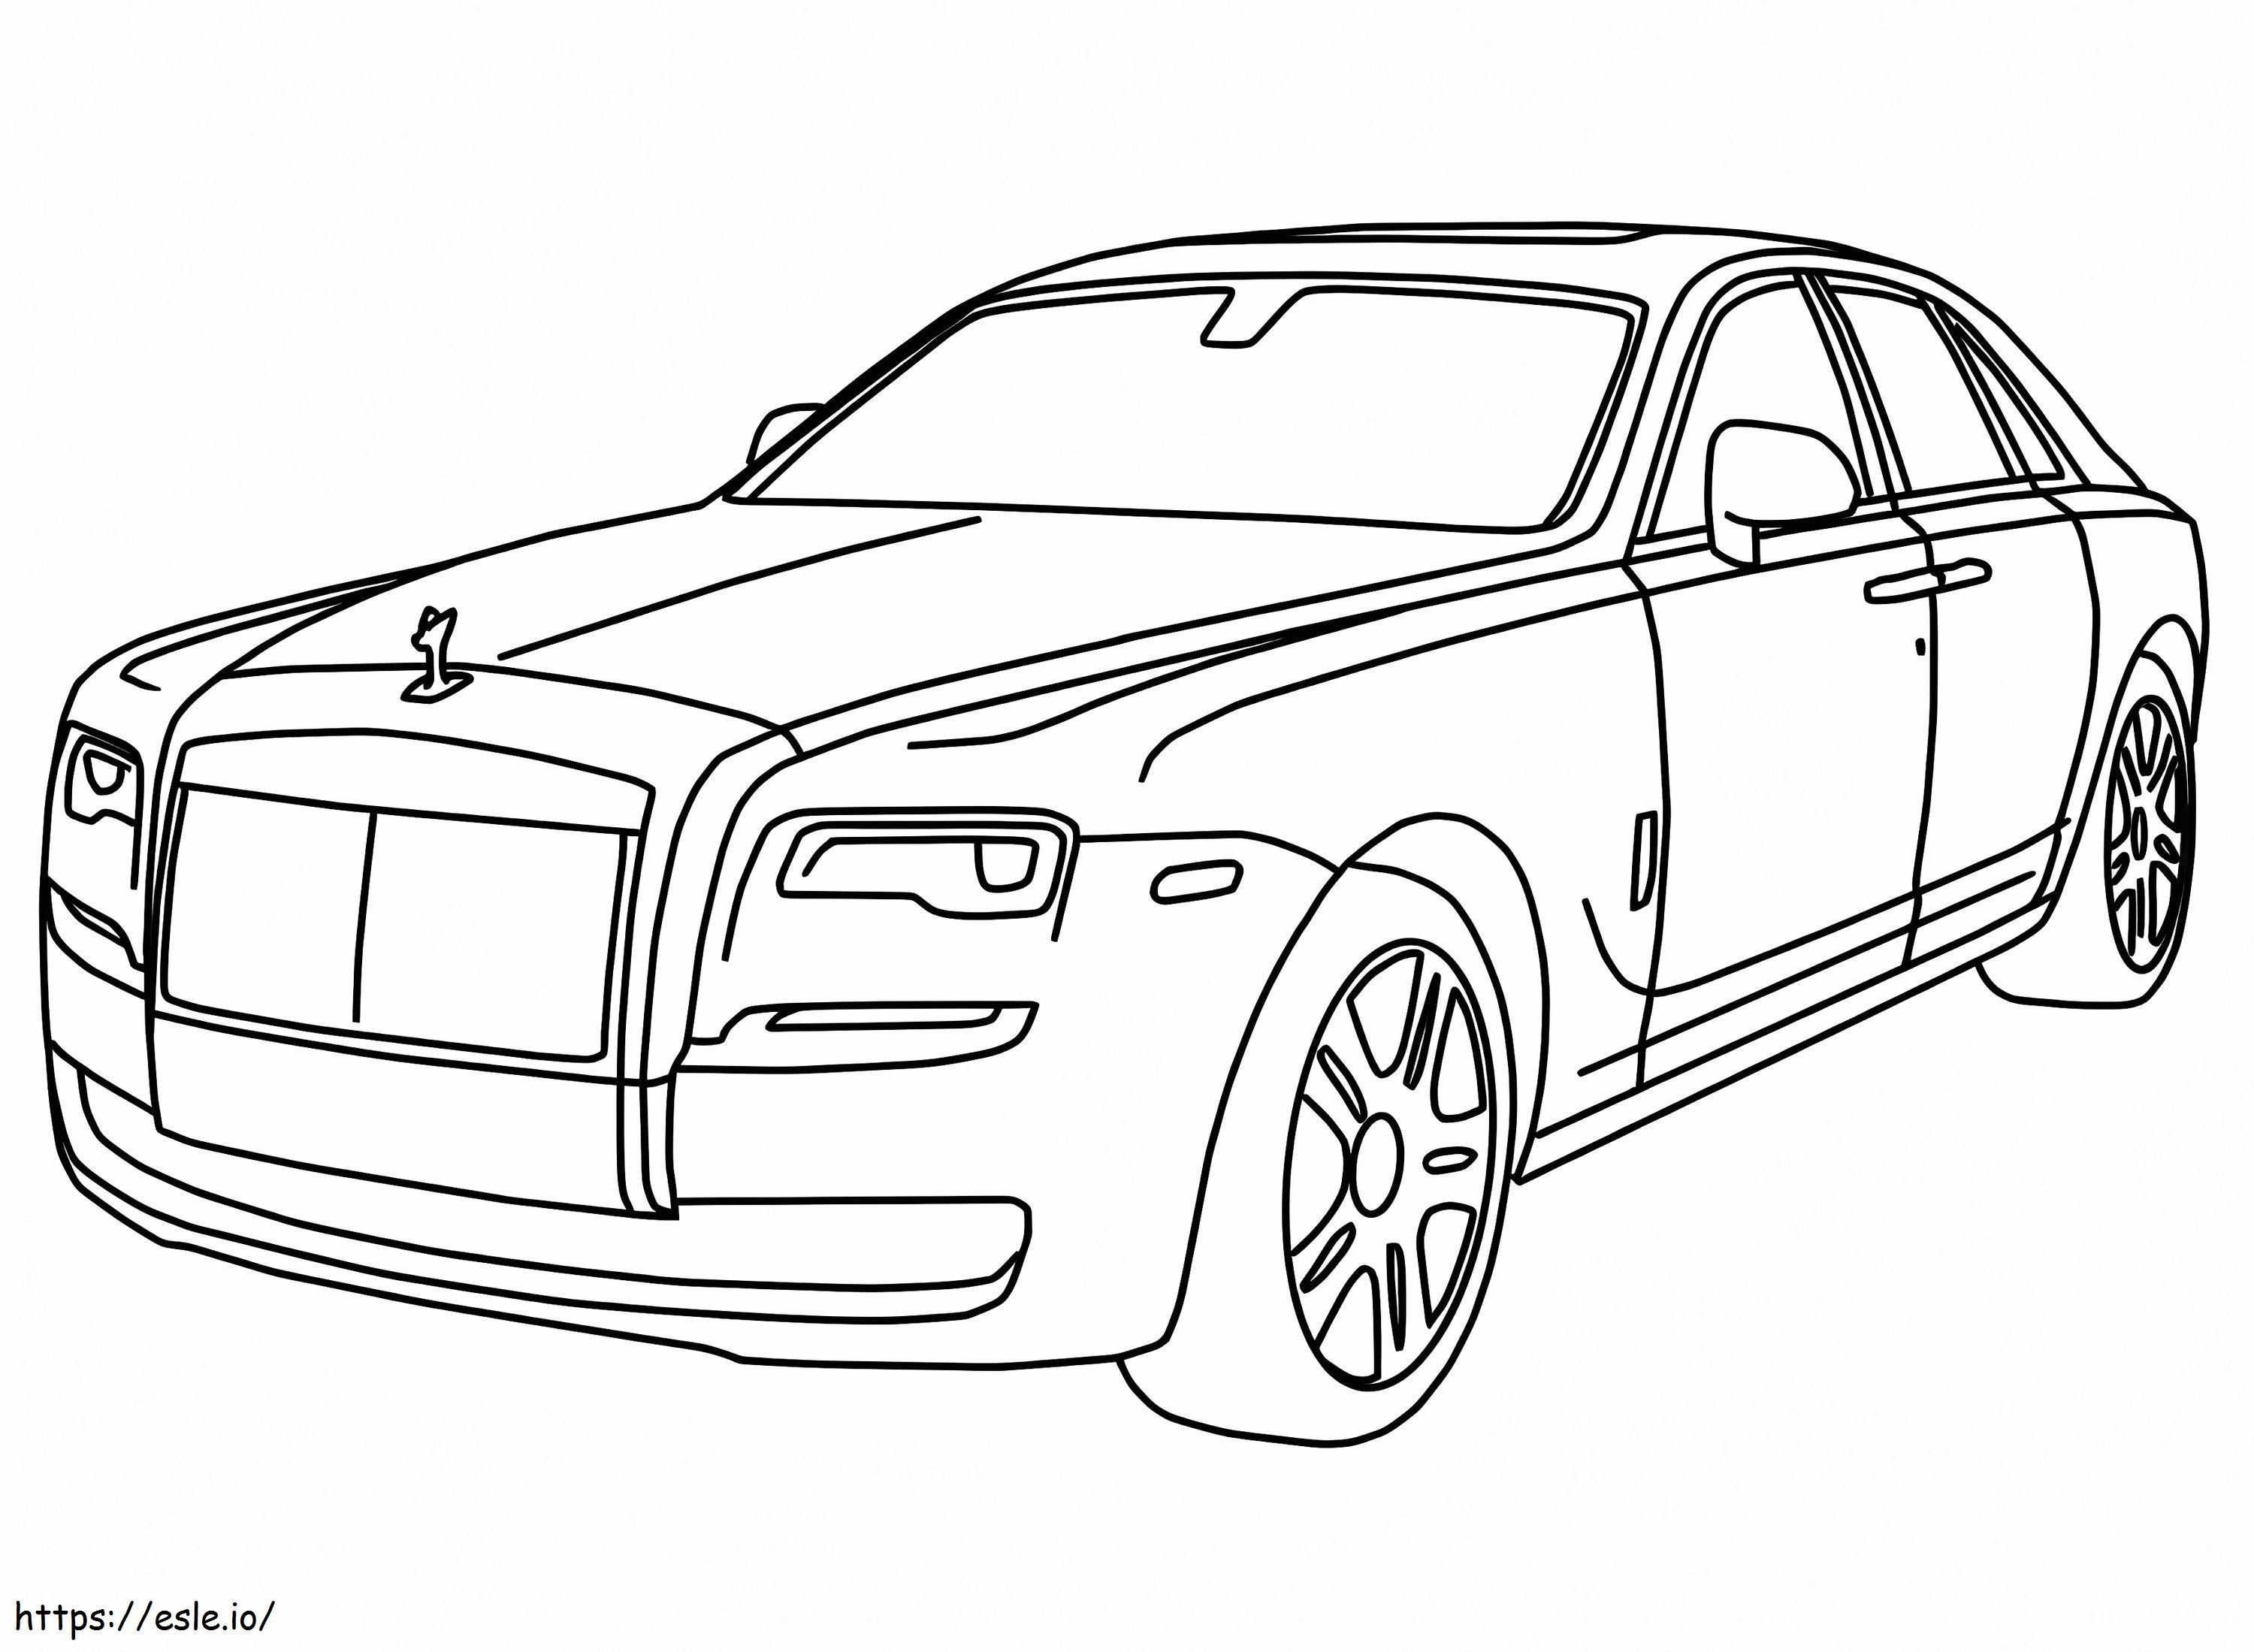 Awesome Rolls Royce coloring page